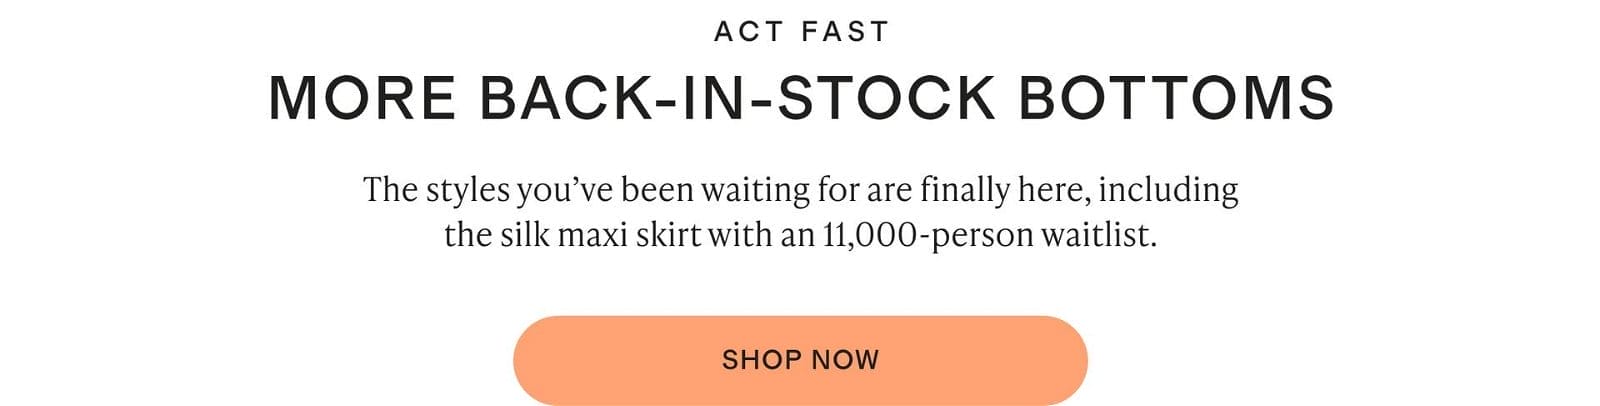 ACT FAST MORE BACK-IN-STOCK BOTTOMS